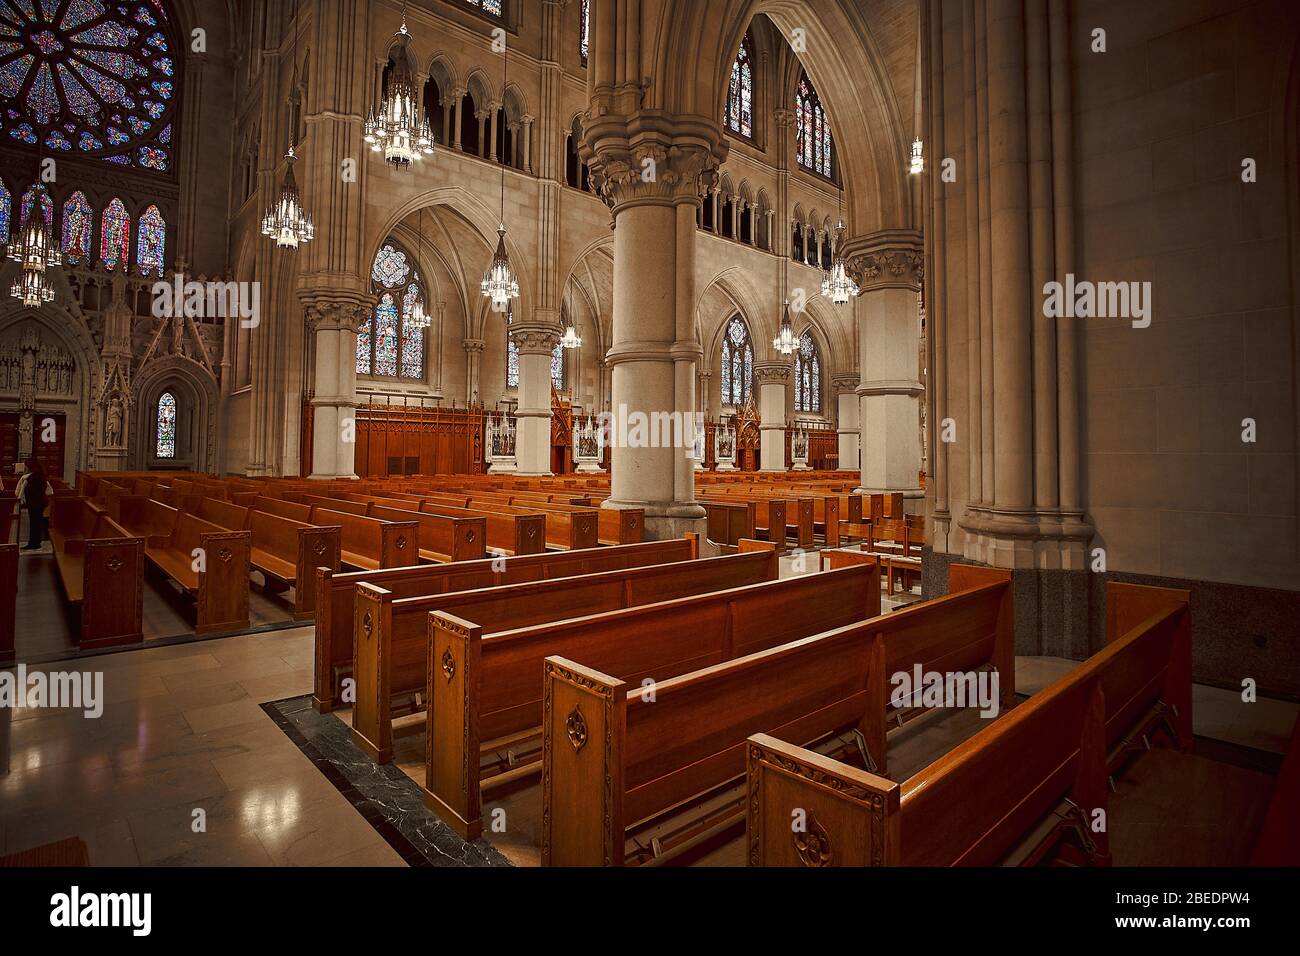 Interior view of the Cathedral Basilica of the Sacred Heart cathedral in Newark New Jersey, USA. Stock Photo